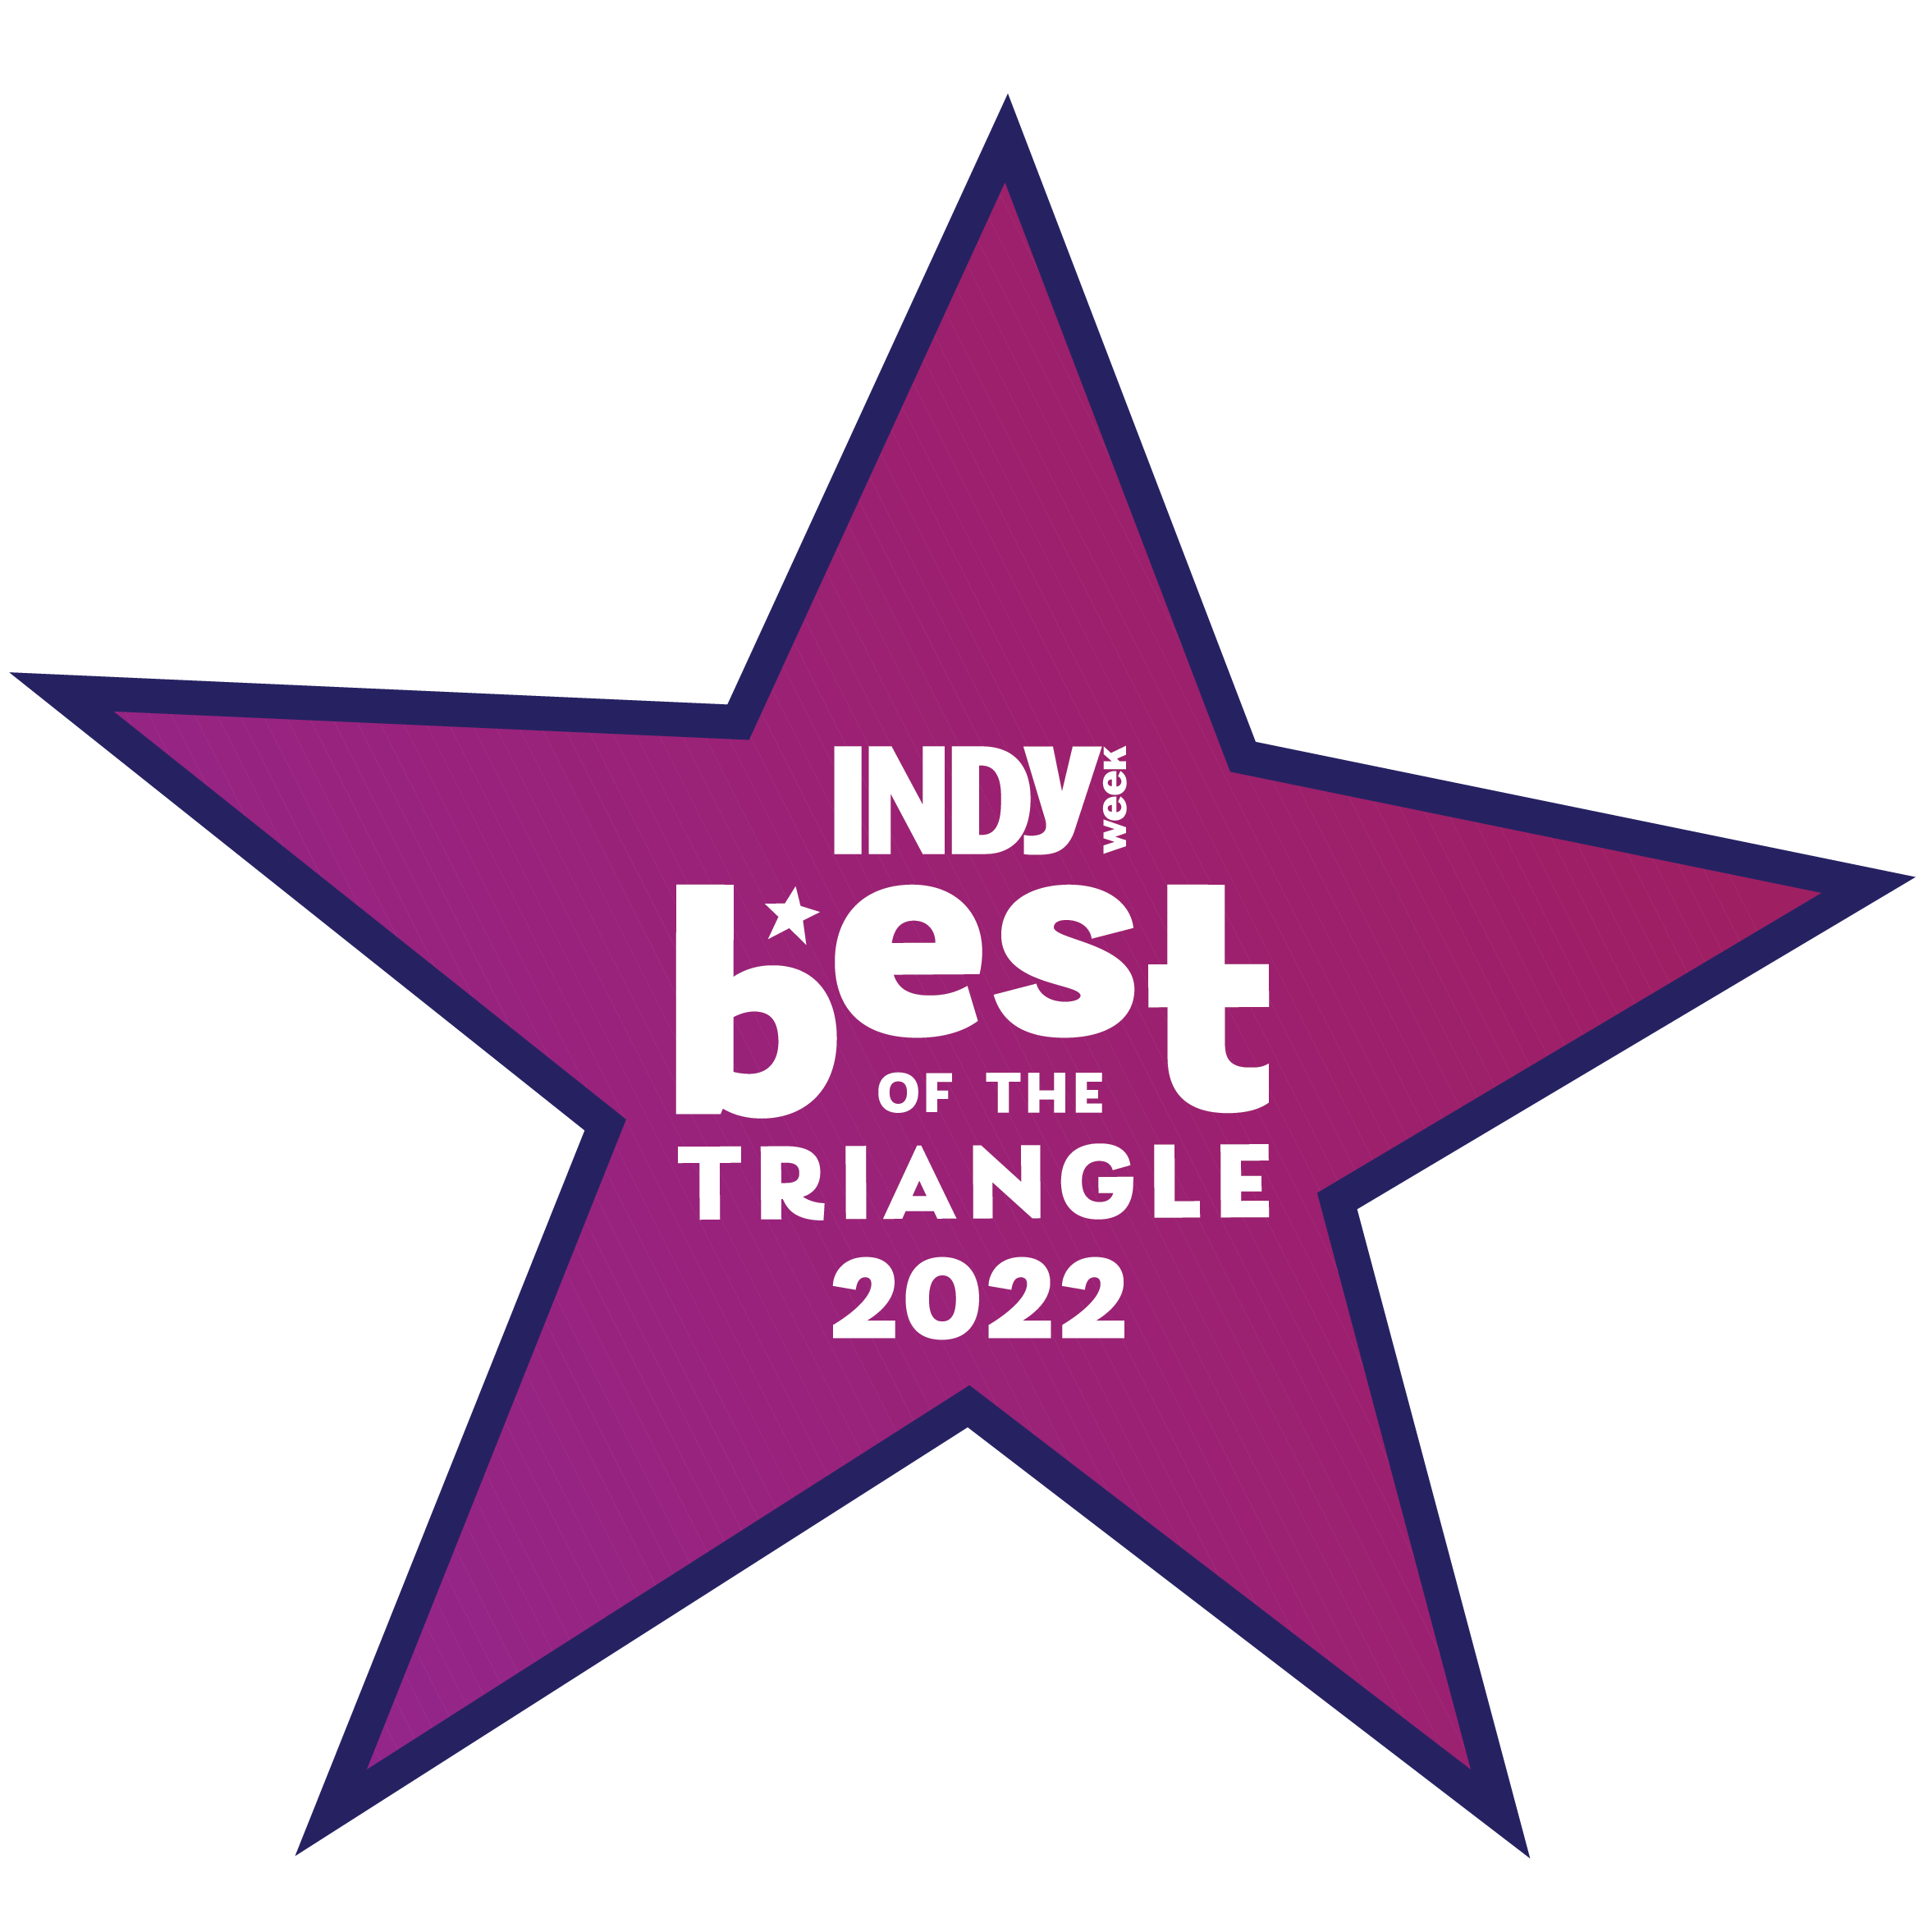 Indy best of the triangle 2022